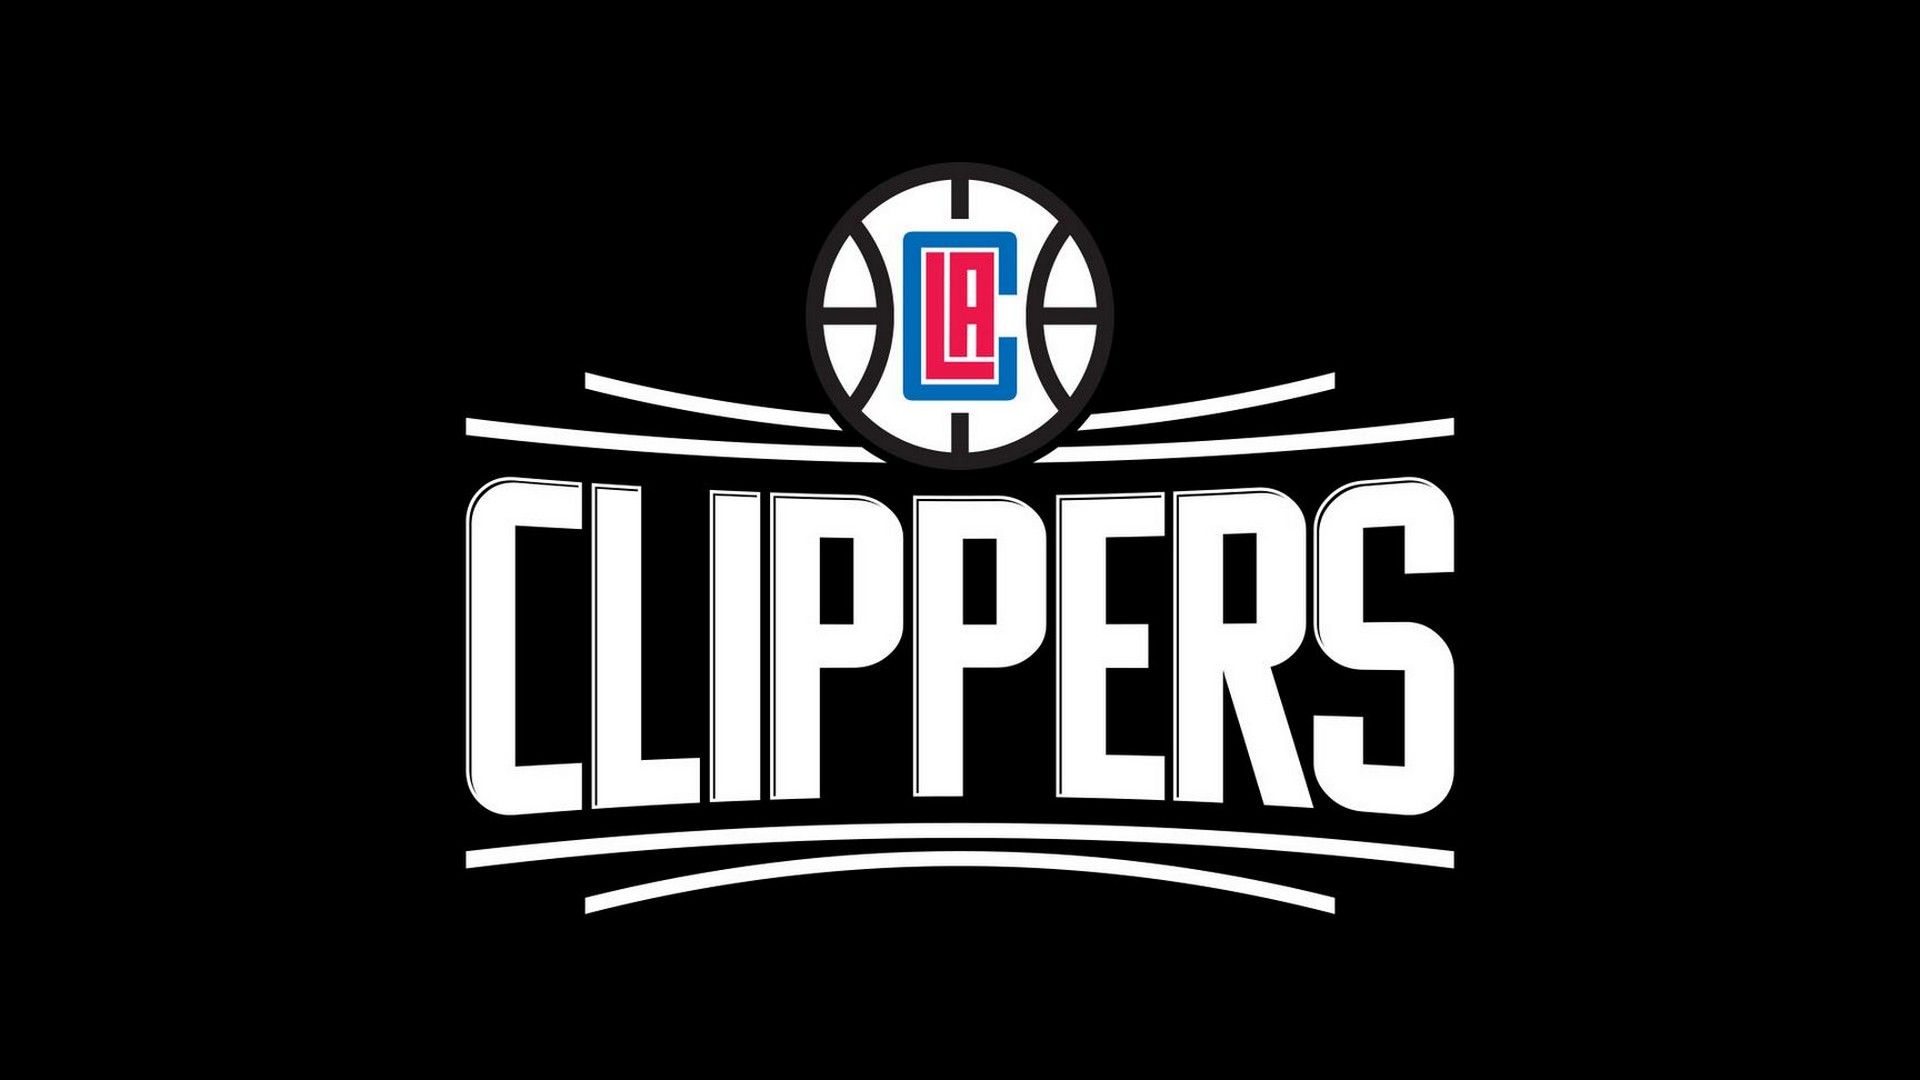 Los Angeles Clippers Wallpaper For Mac Background Basketball Wallpaper. Los angeles clippers, Basketball wallpaper, Clippers